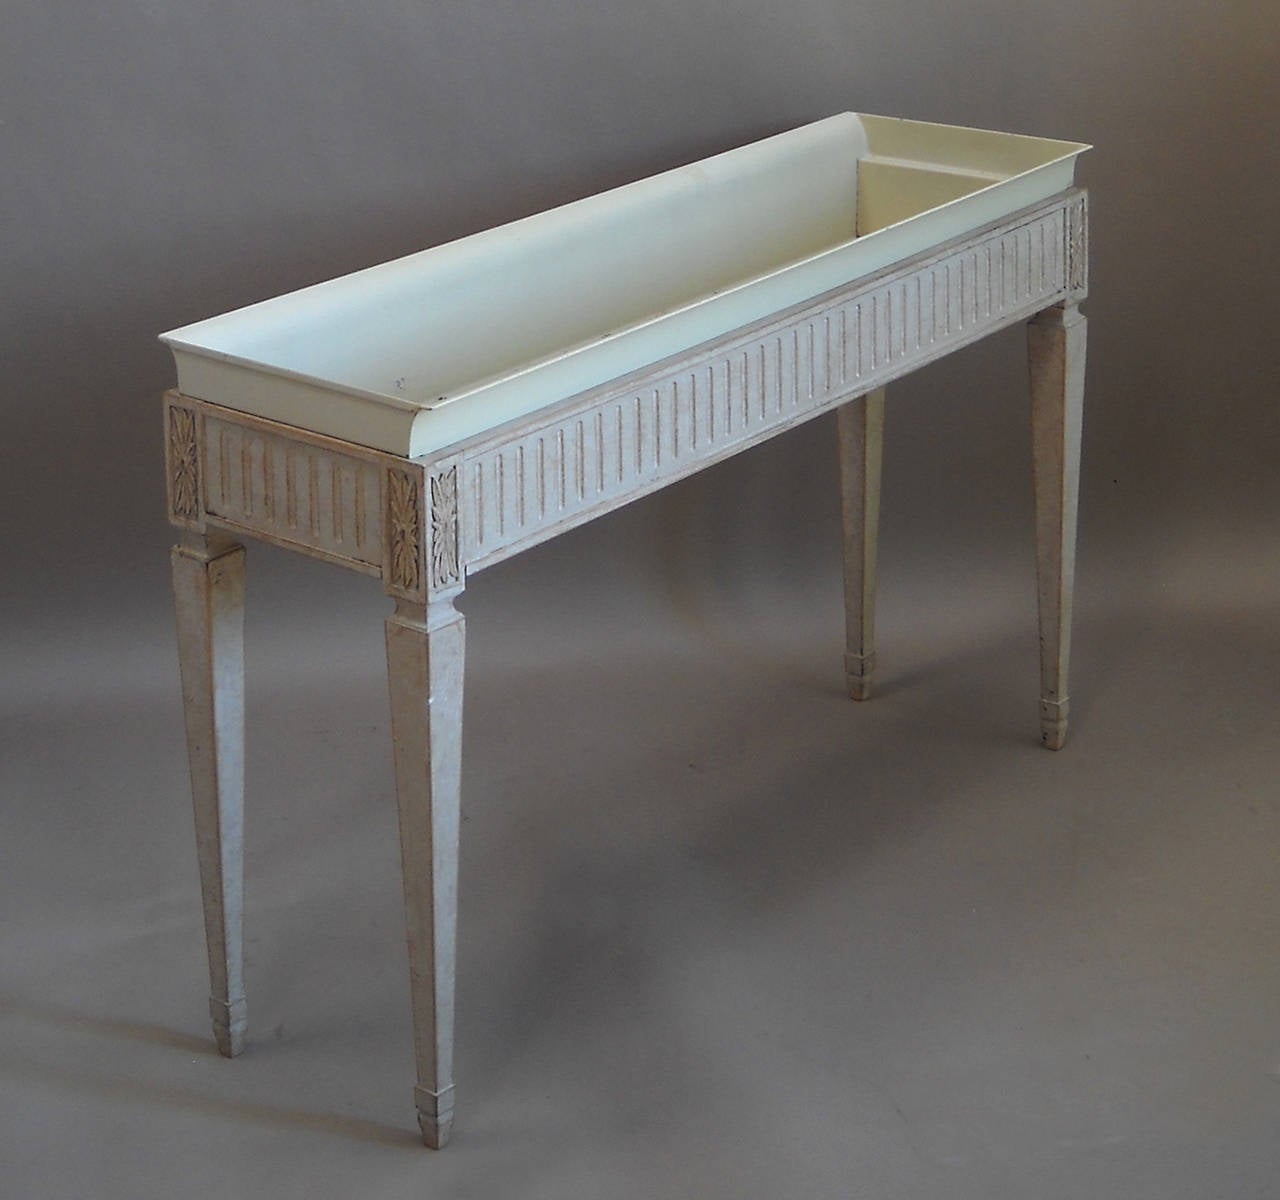 Swedish jardiniere, circa 1840, with reeded aprons, carved corner blocks a tapering square legs. Tin liner.